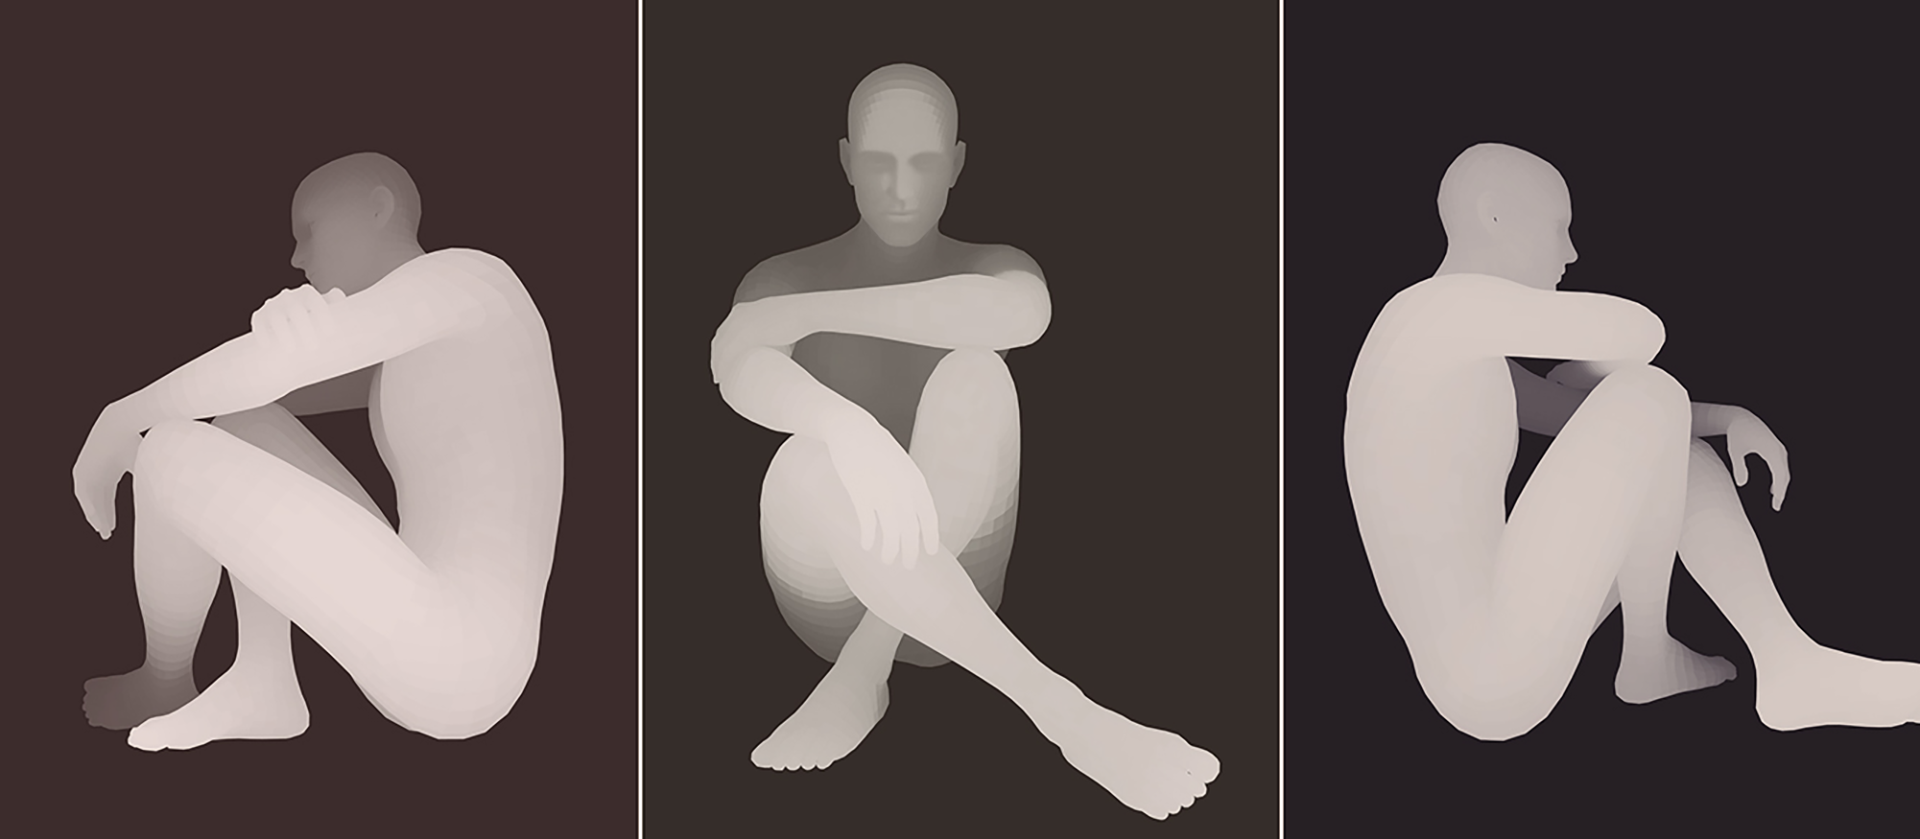 illustration of ghostlike figures in various seated poses